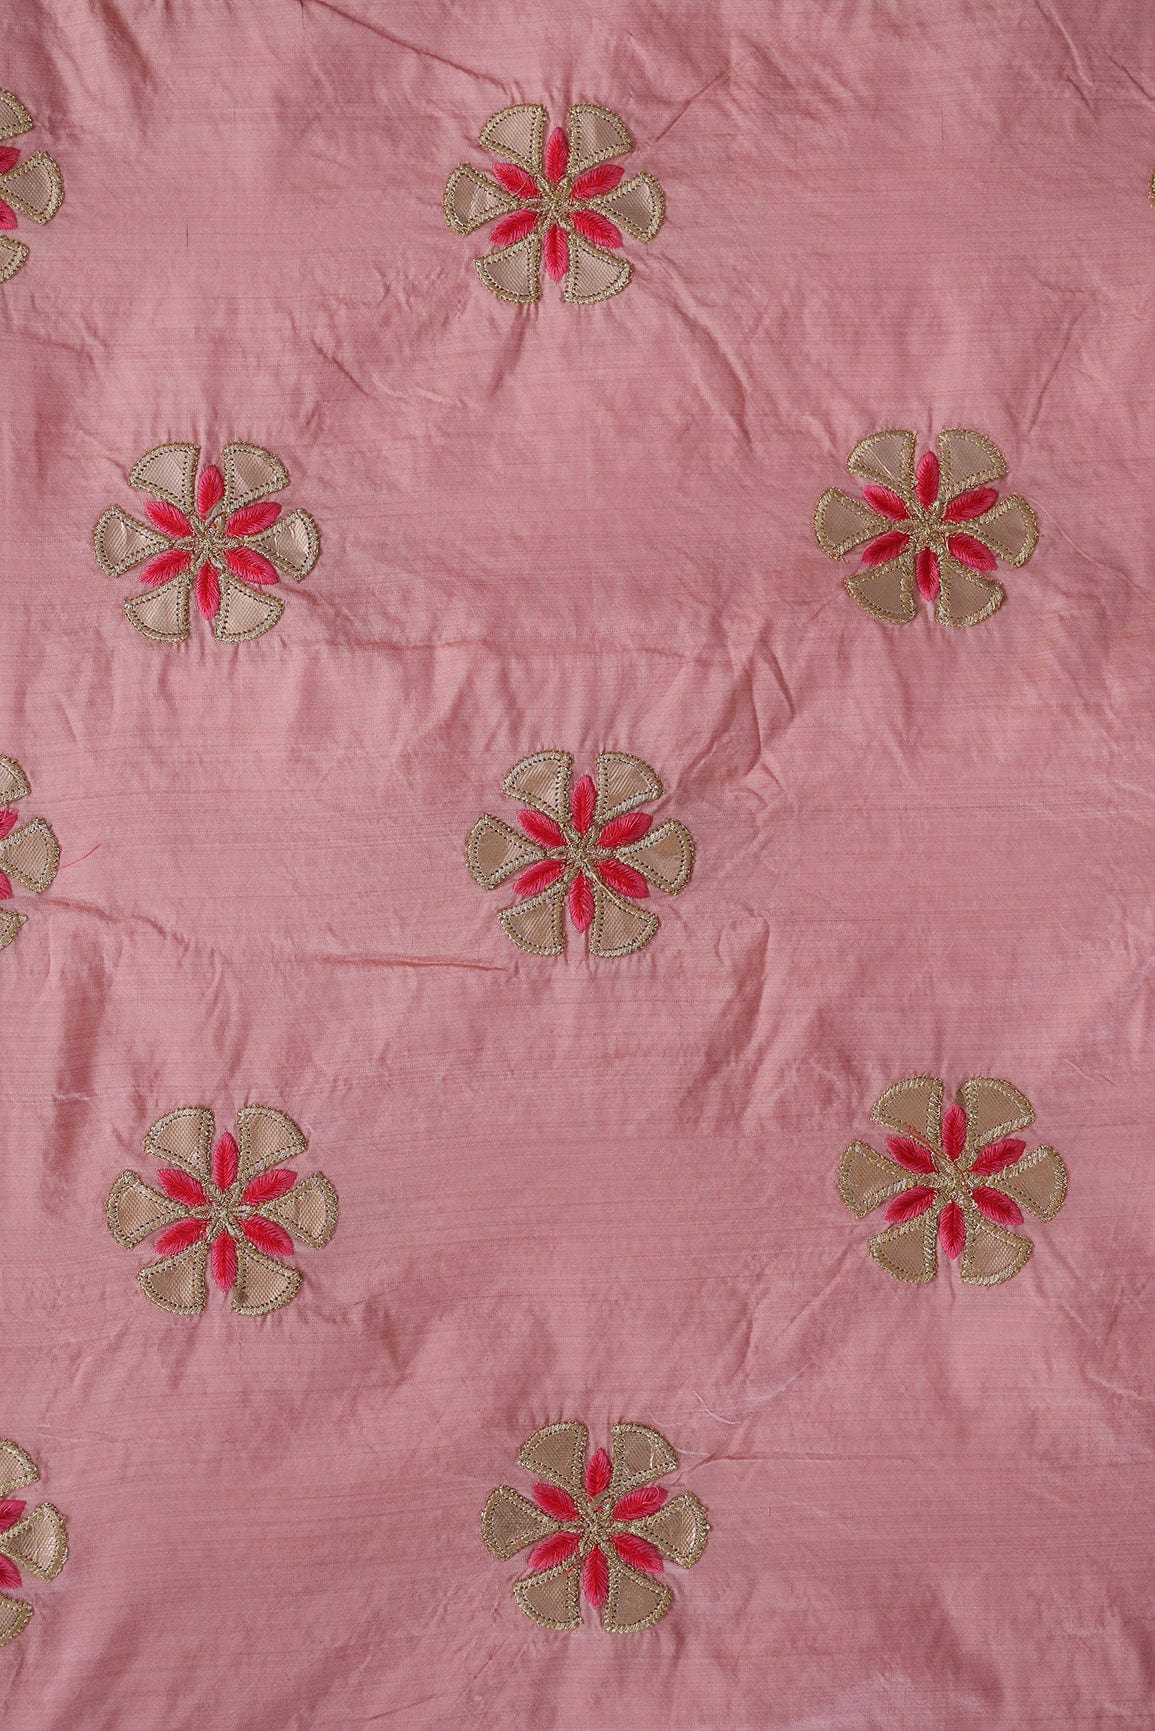 Zari With Red and Pink Motif Embroidery On Baby Pink Bamboo Silk Fabric - doeraa